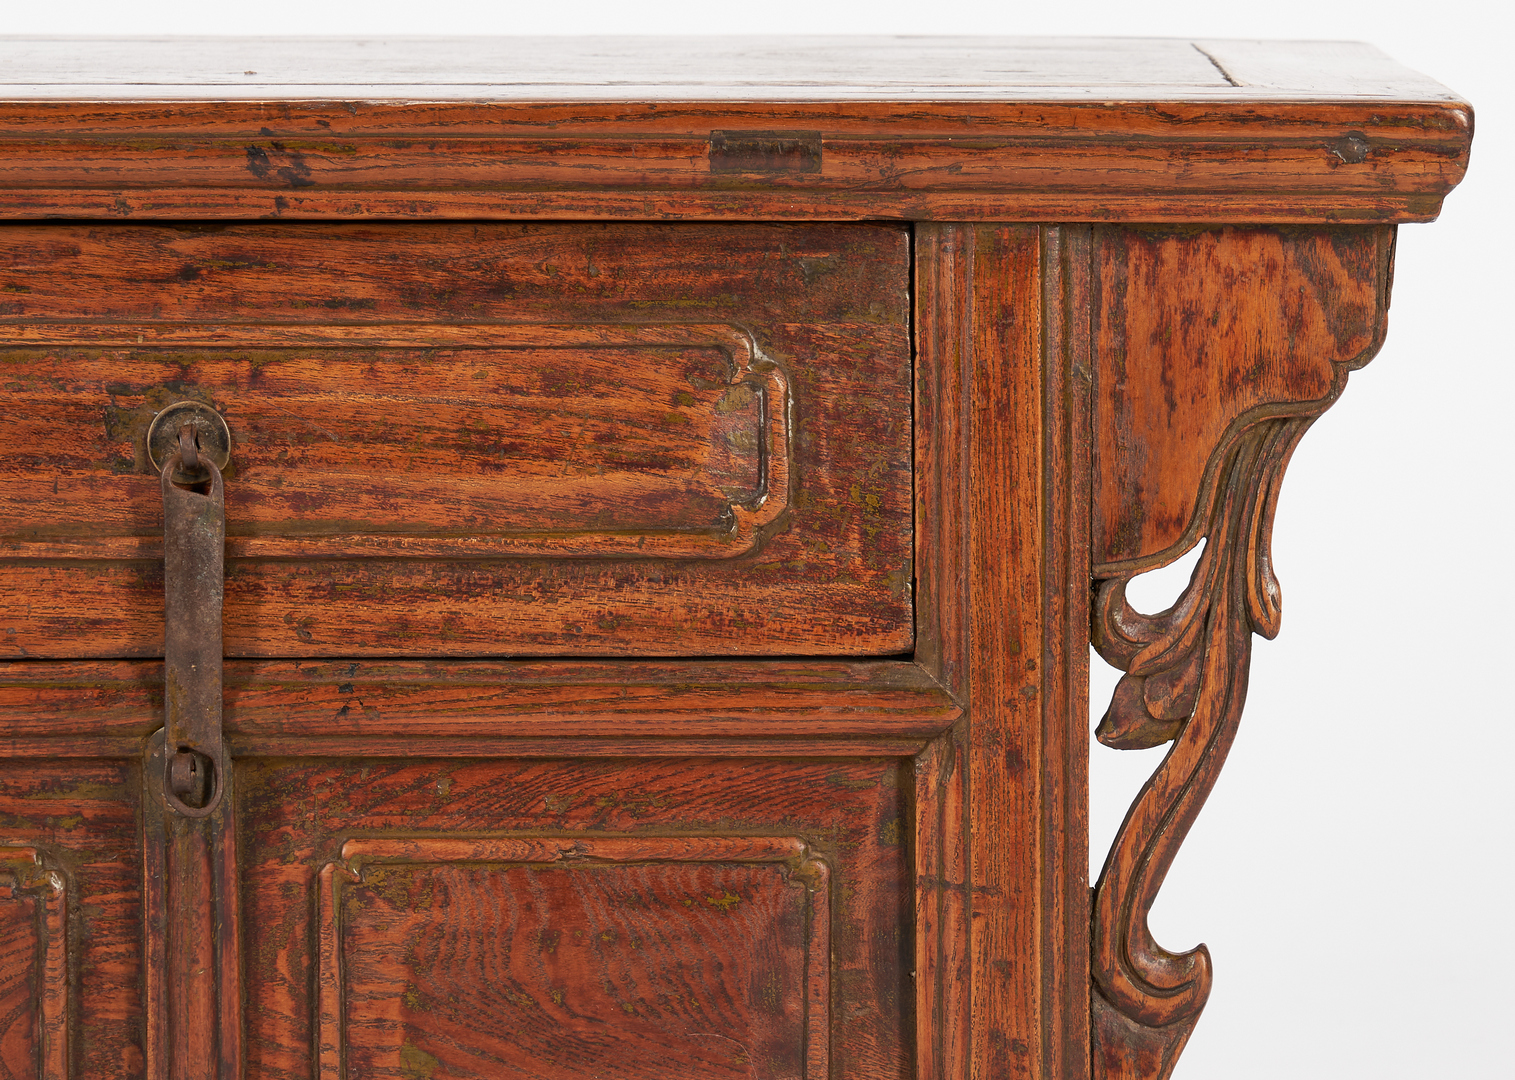 Lot 327: Chinese Stand, Chair and Cabinet with Secret Compartments